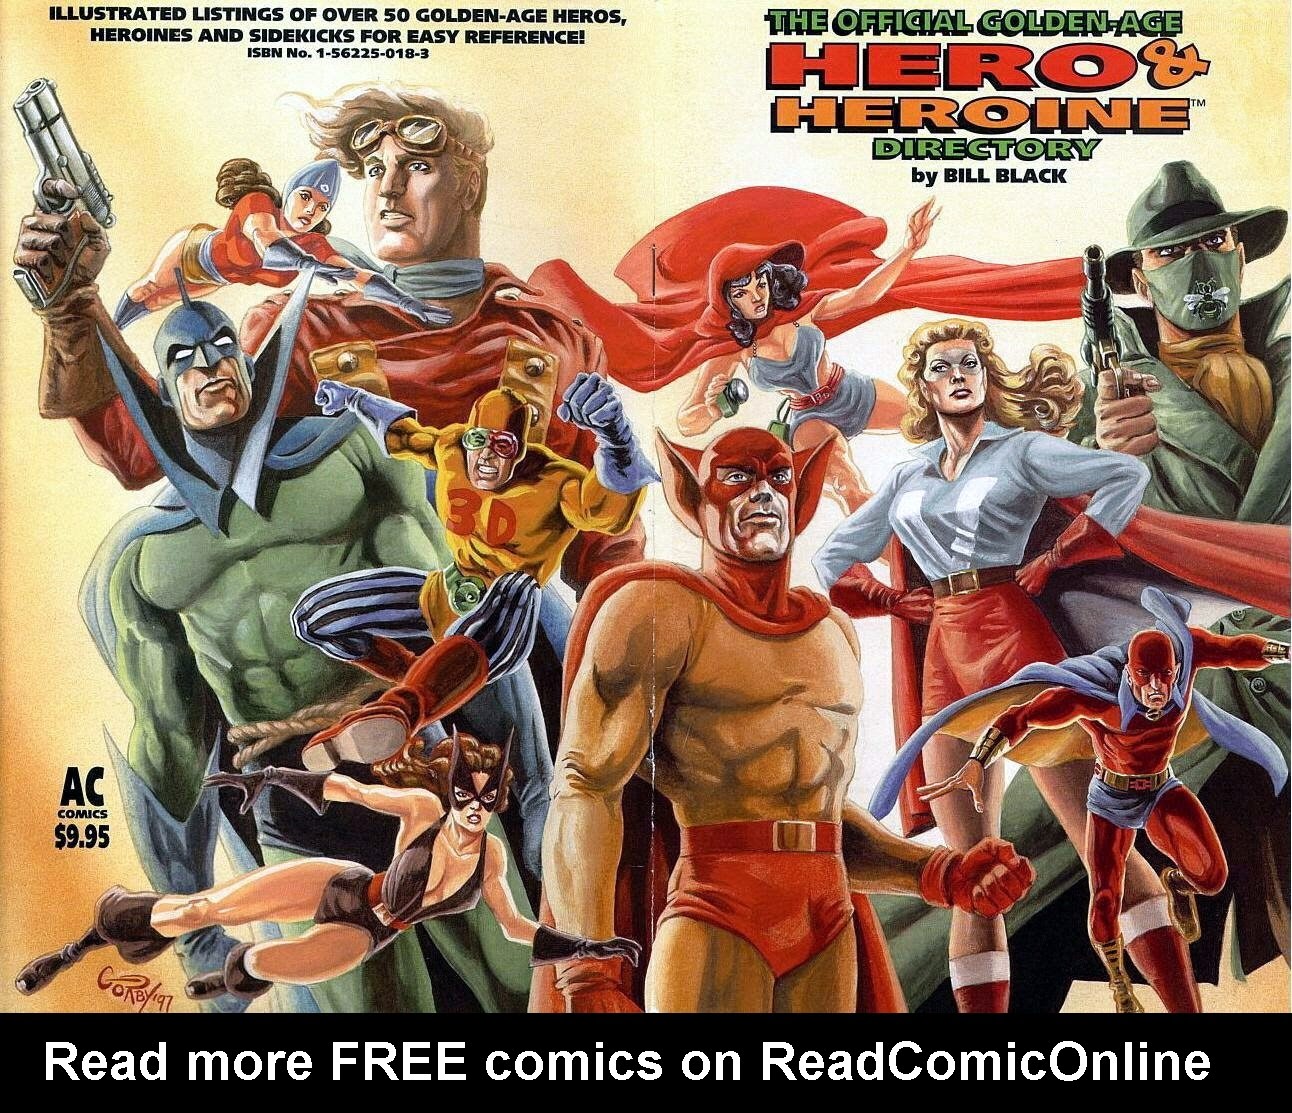 Read online Official Golden-Age Hero & Heroine Directory comic -  Issue # TPB - 1